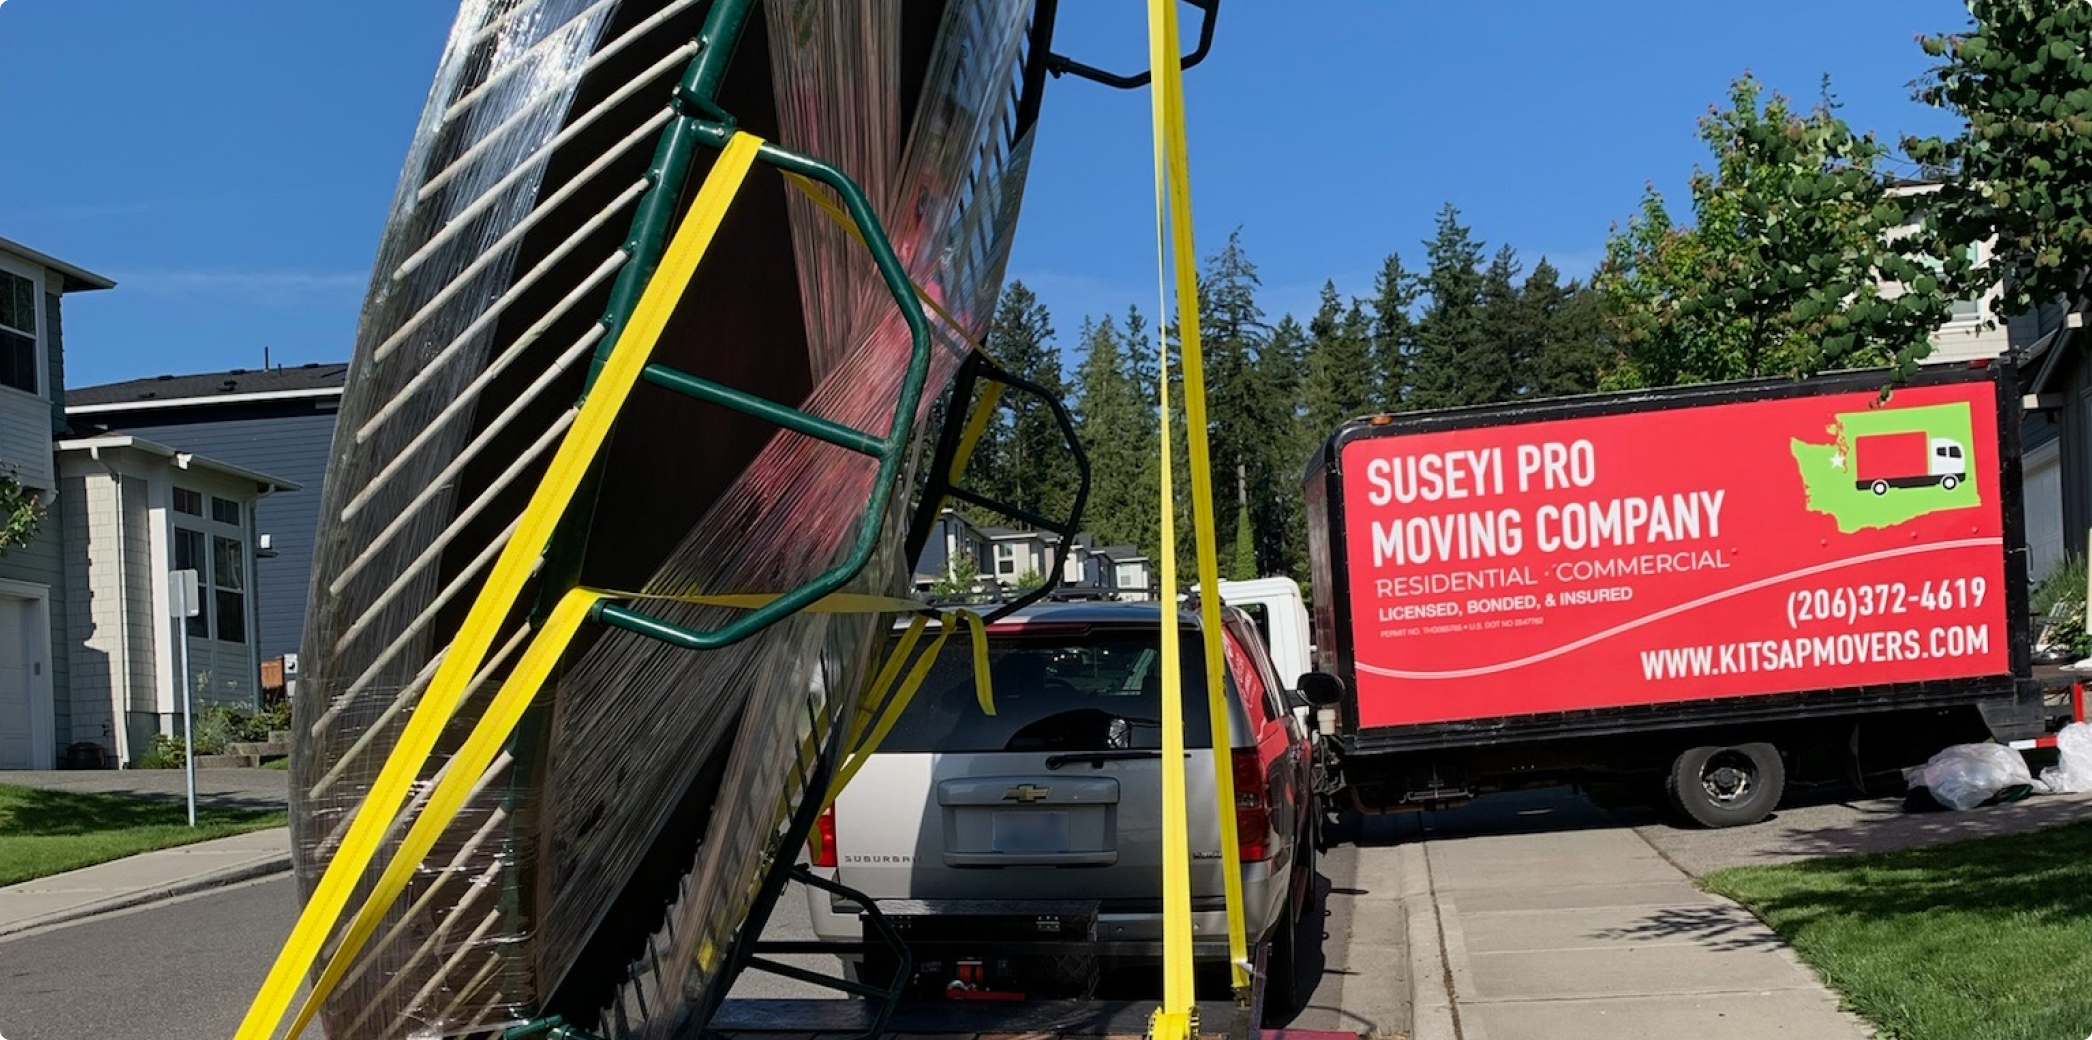 Heavy item on a Suseyi Pro Moving Company trailer